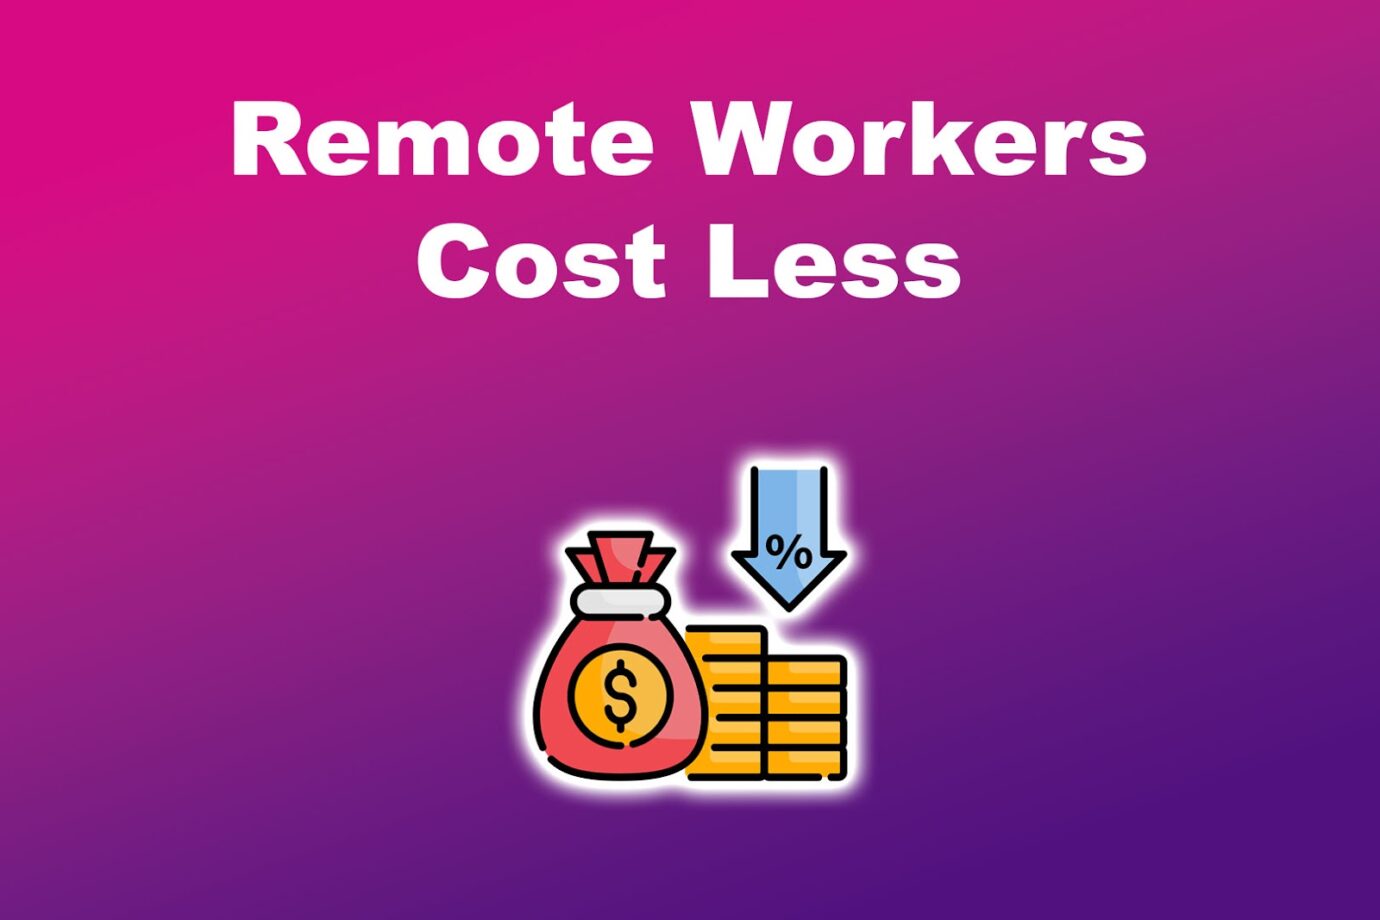 Remote Workers Cost Less